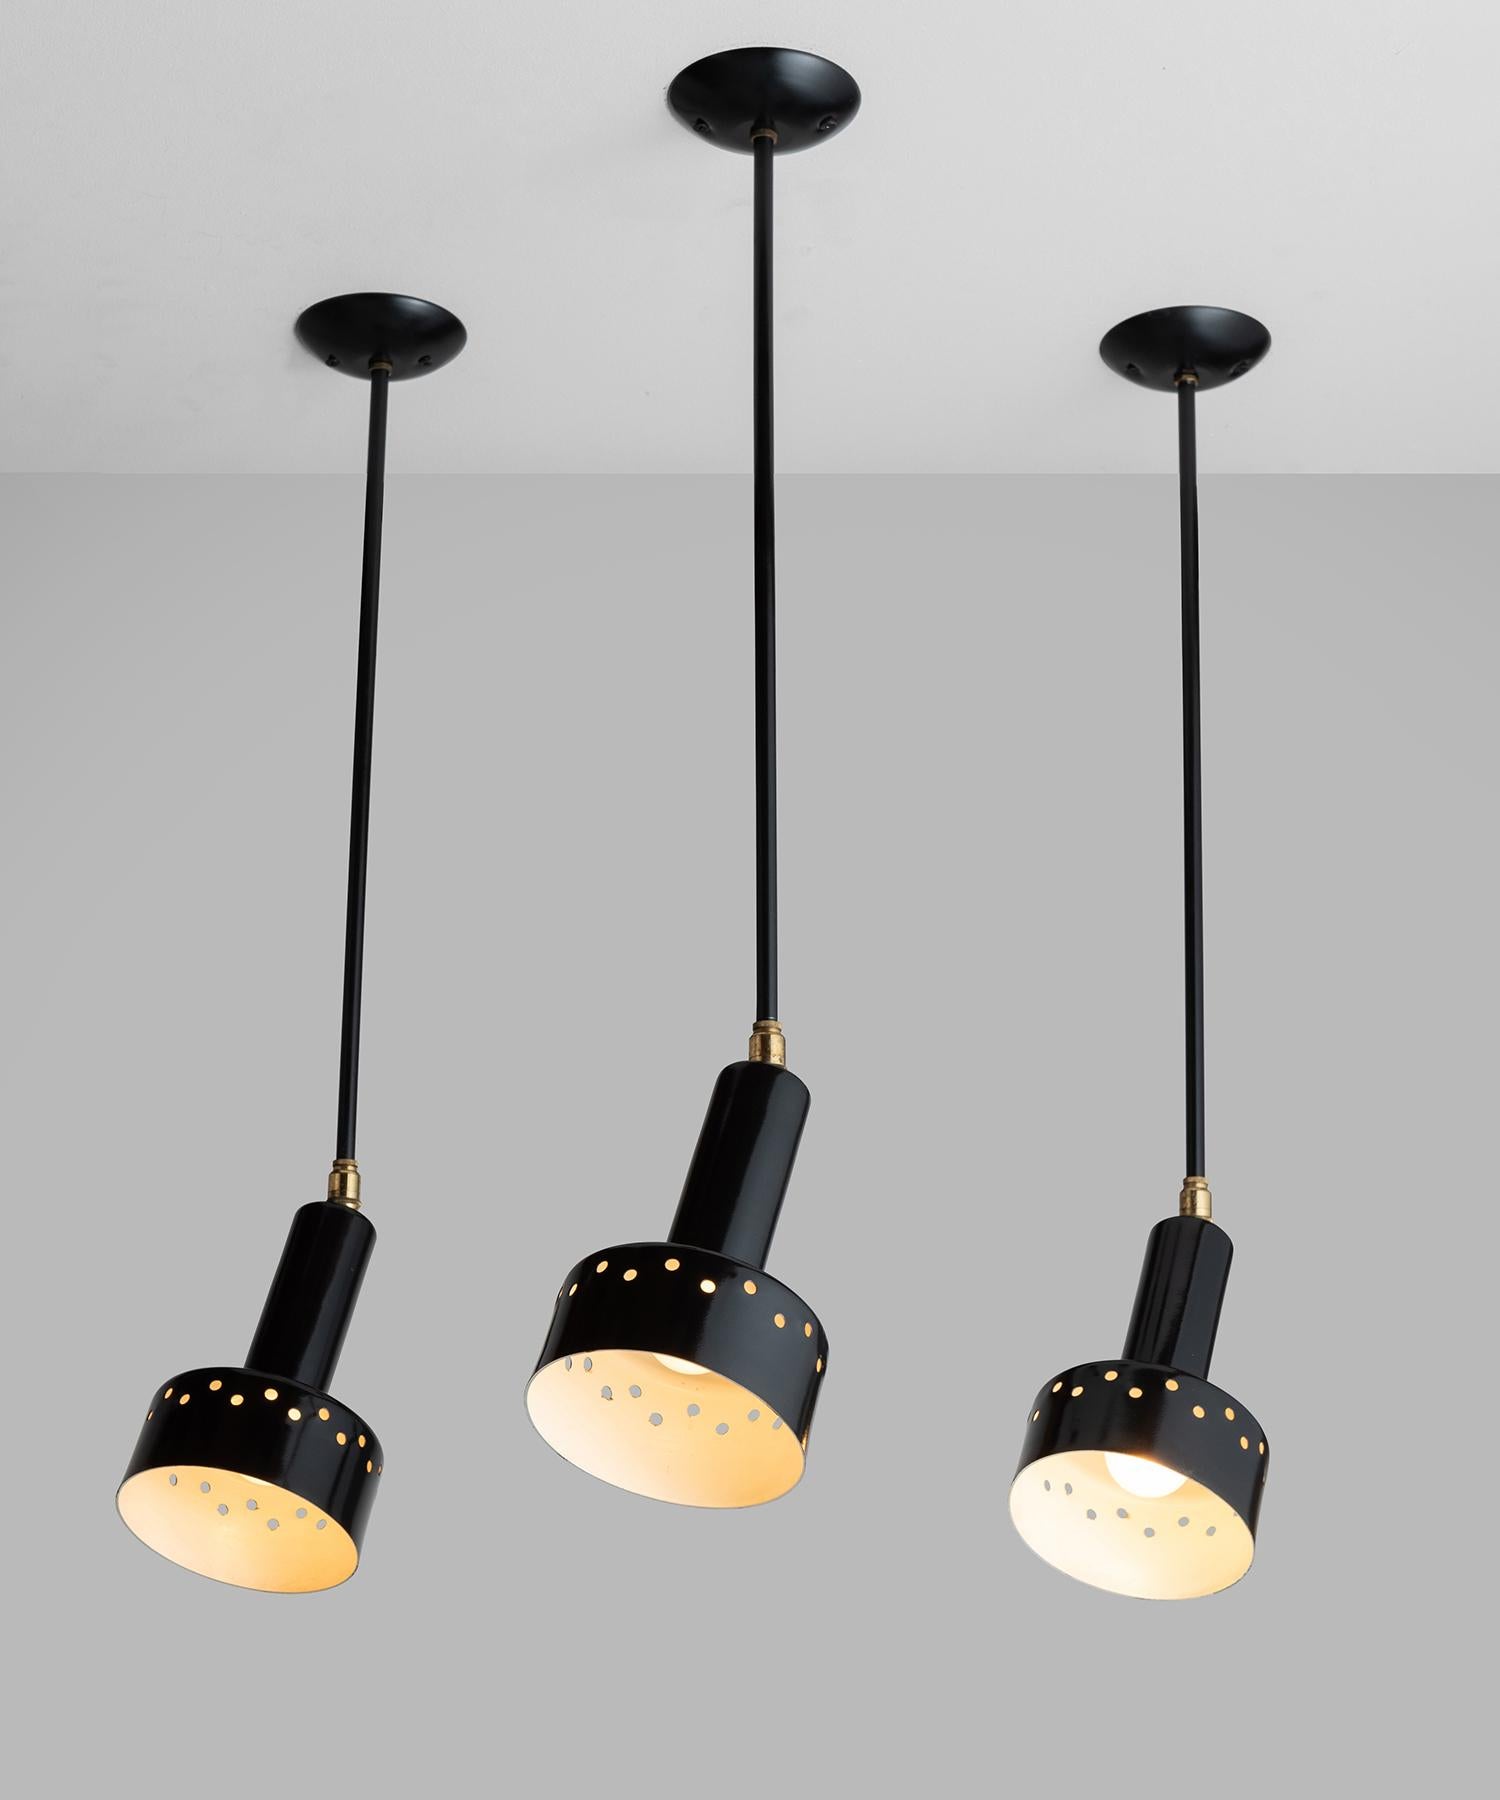 Black perforated metal ceiling mount light, France 1950.

Black metal fixture with pivoting shade and brass detail.